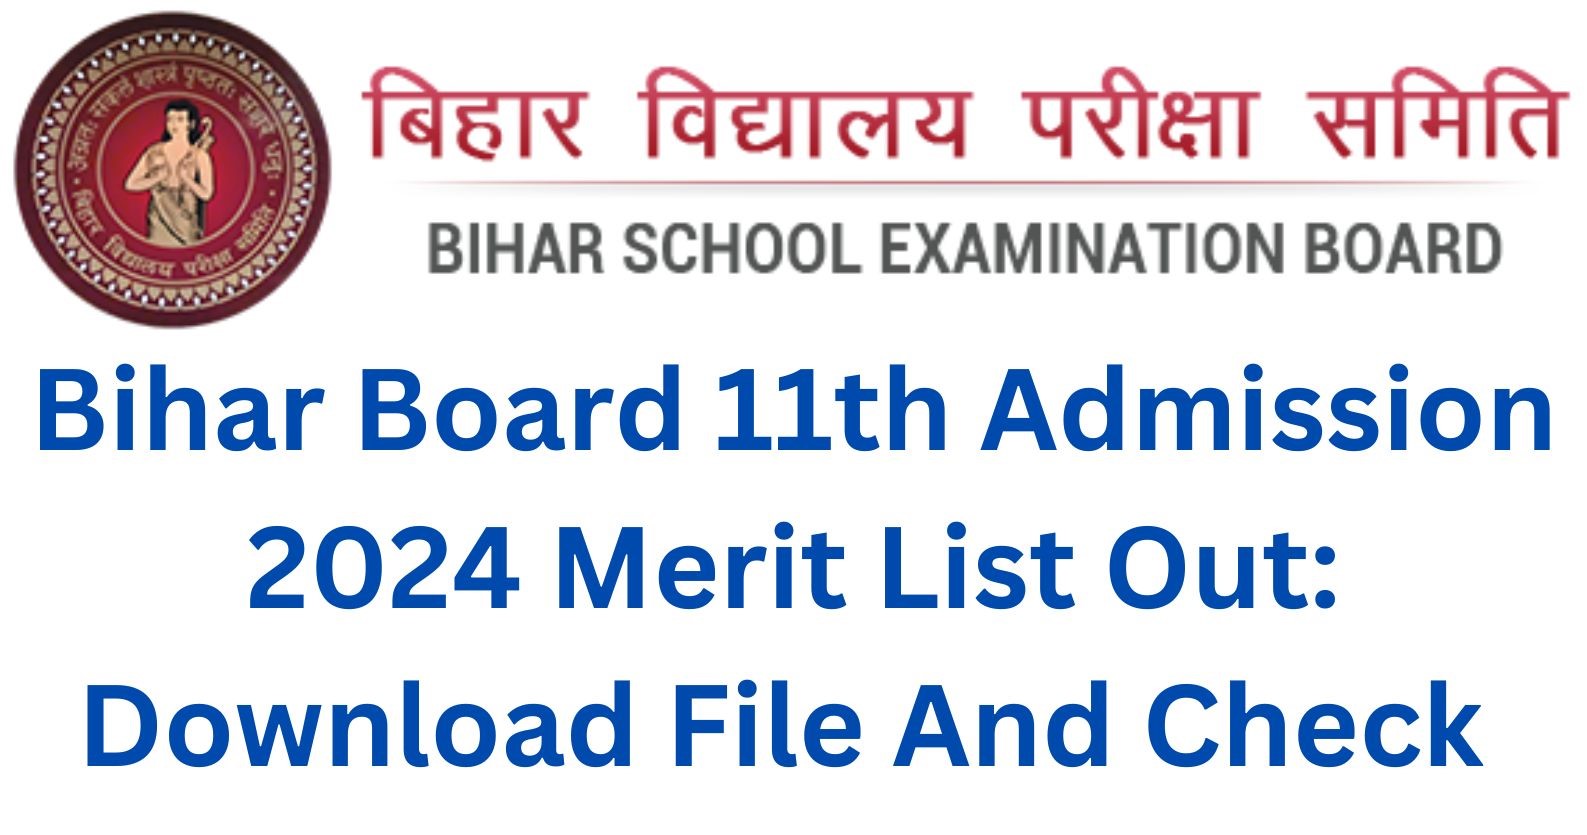 Bihar Board 11th Admission 2024 Merit List Out (Soon): Download File And Check